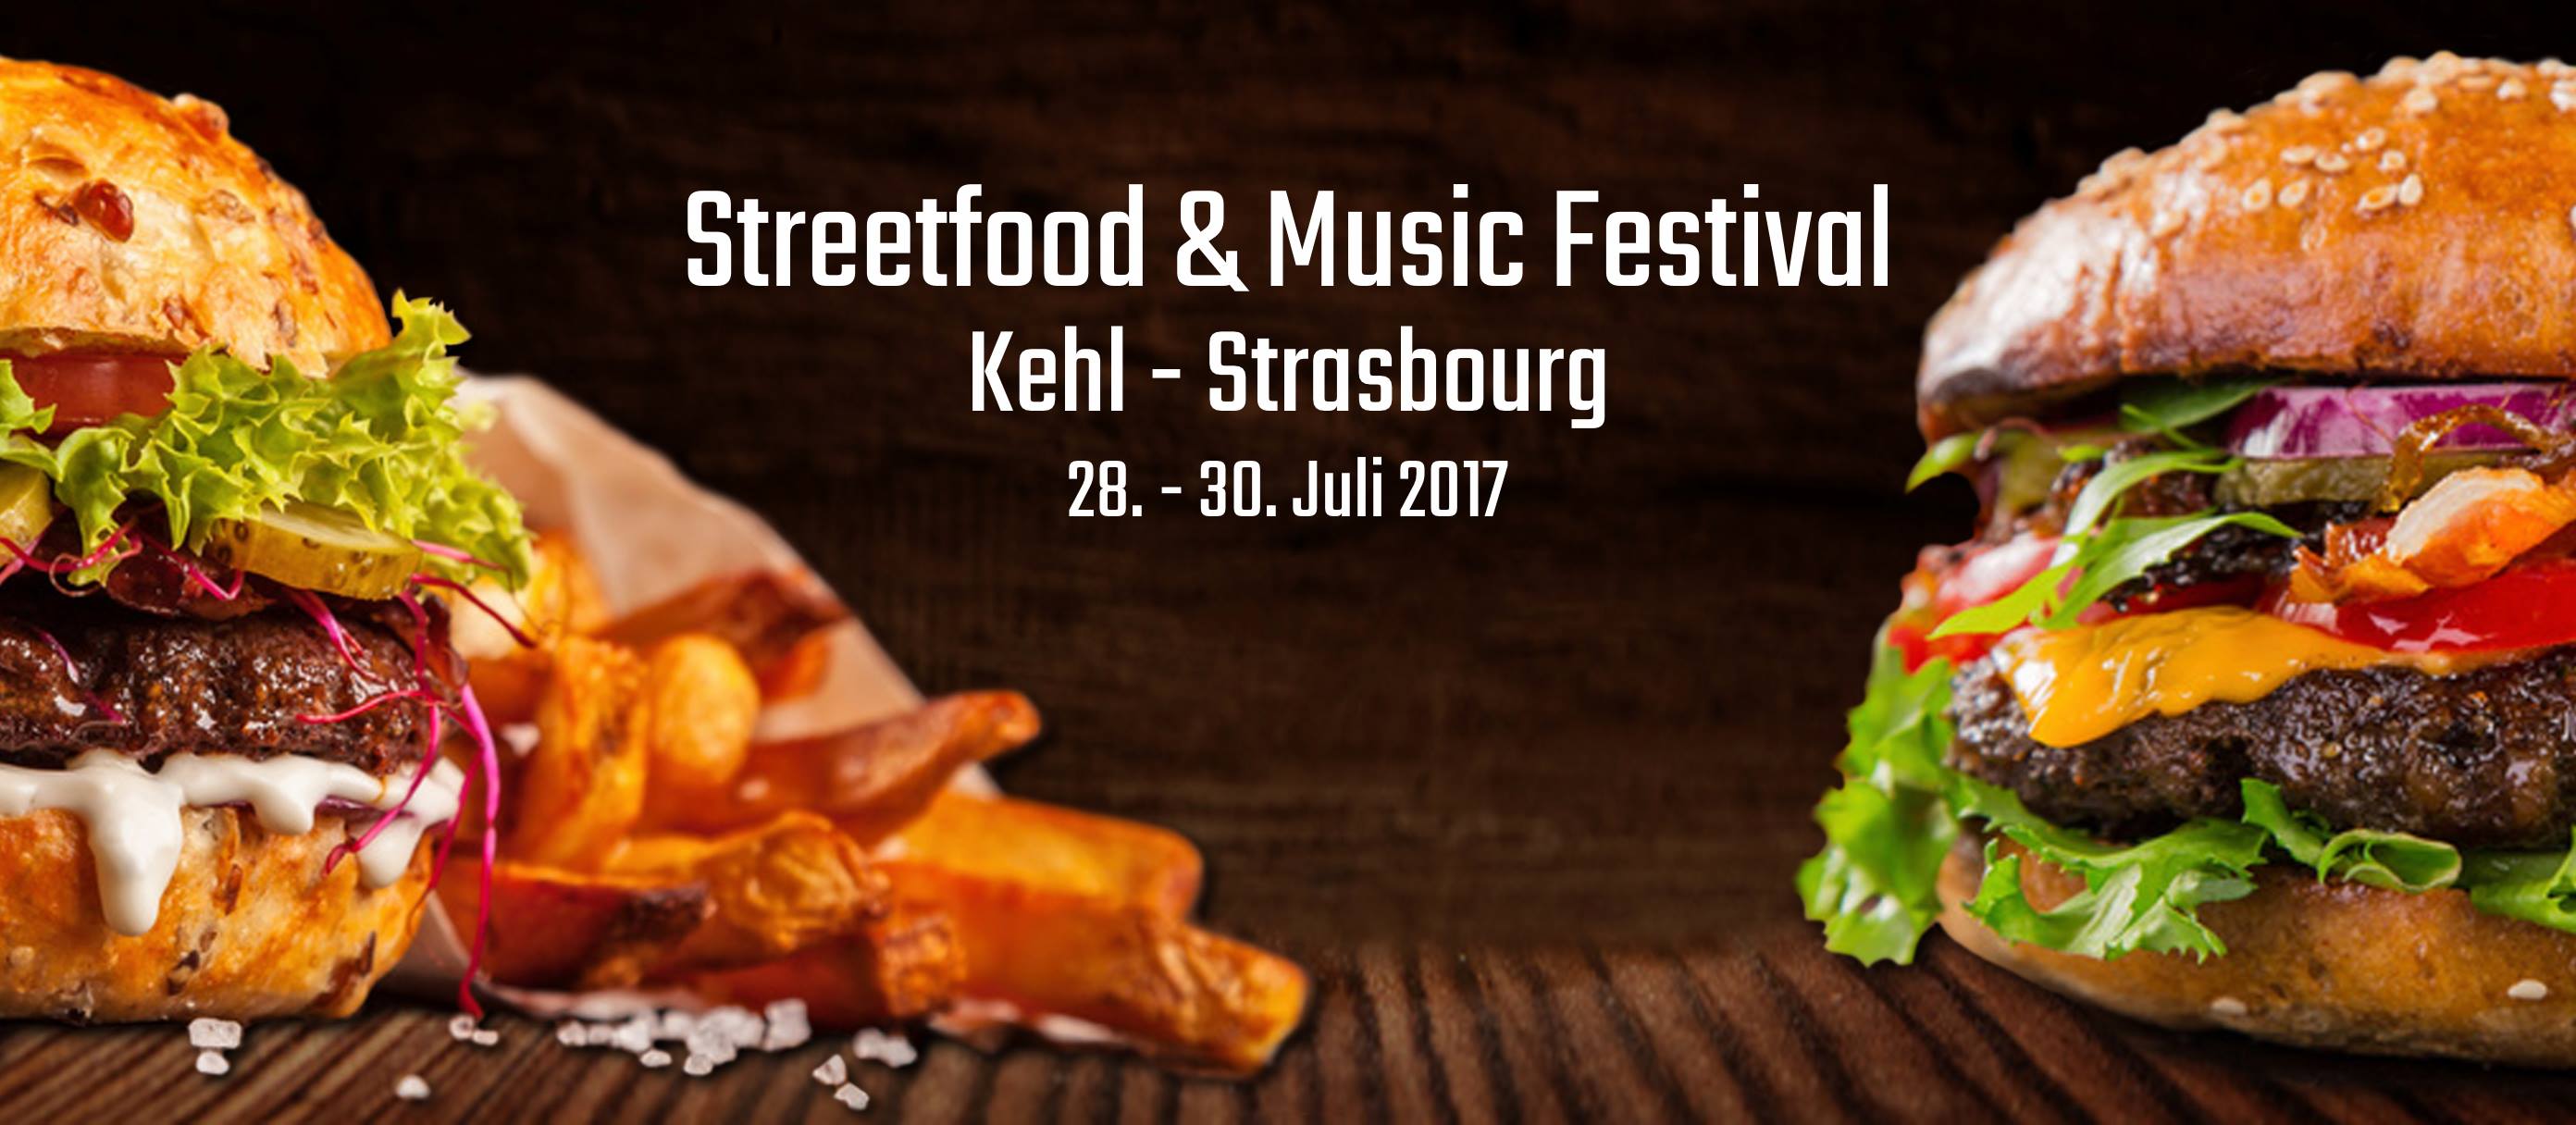 Top Event - Streetfood & Music Festival